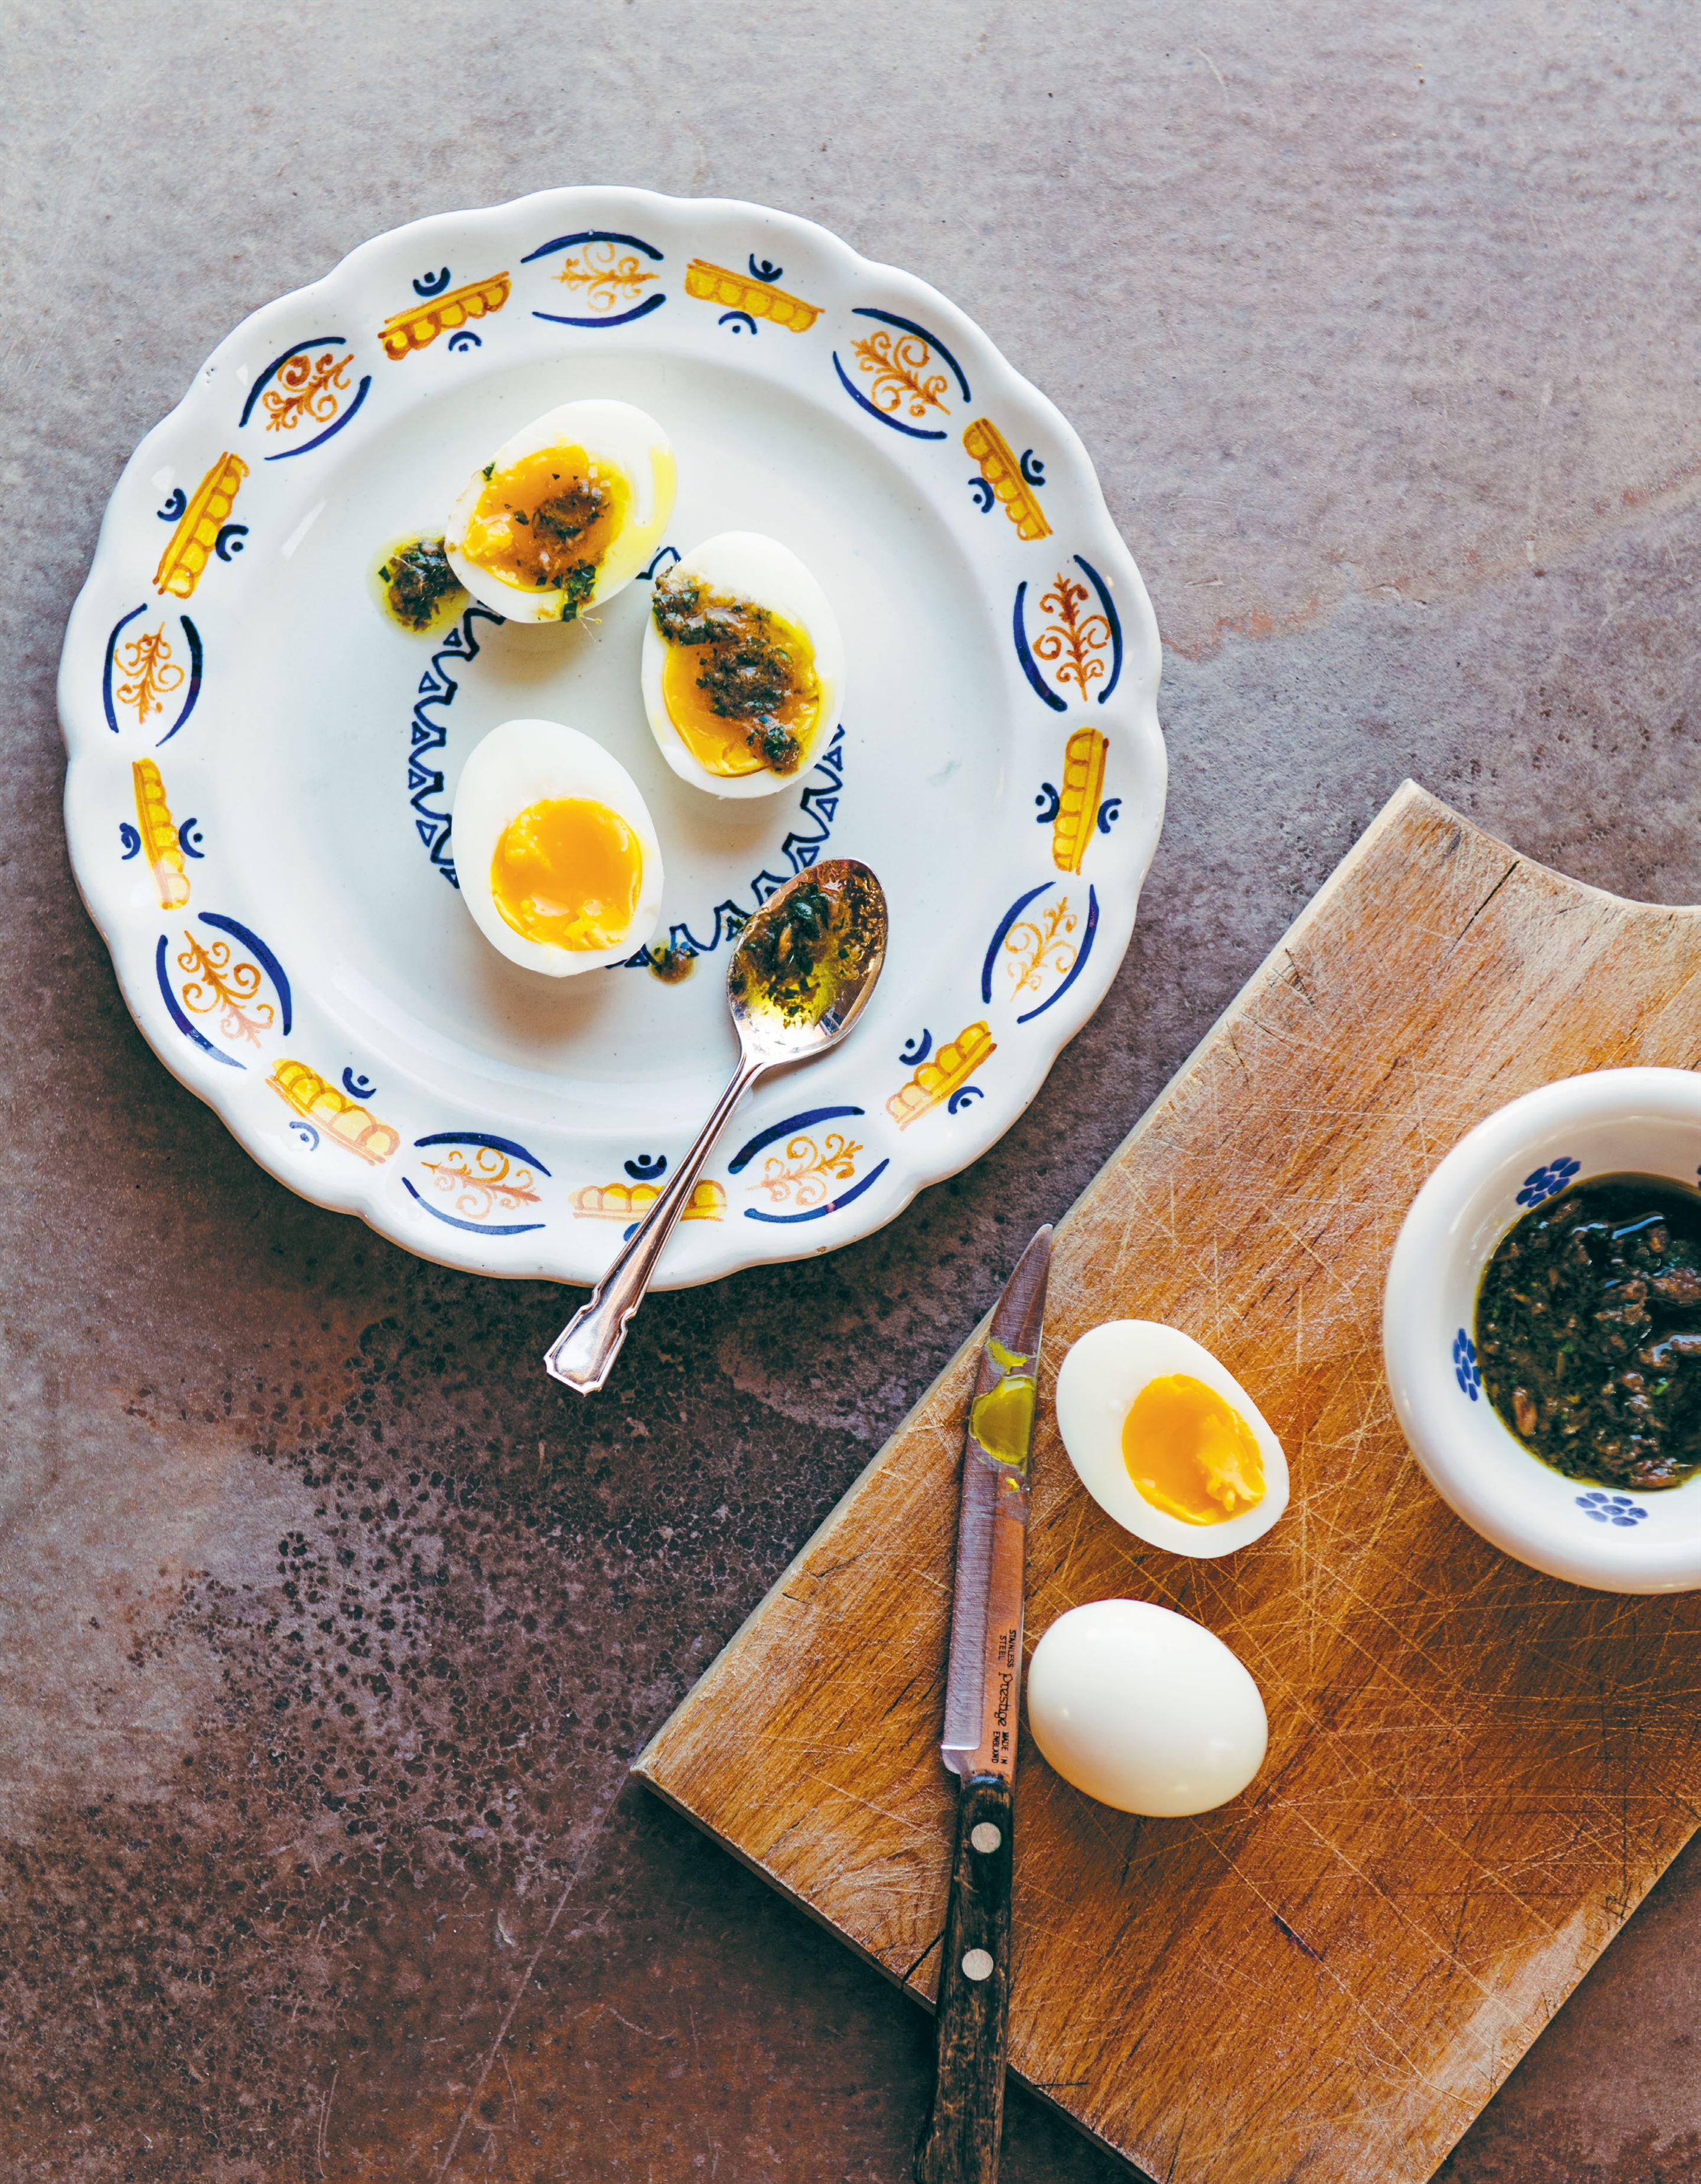 Boiled eggs with anchovy sauce